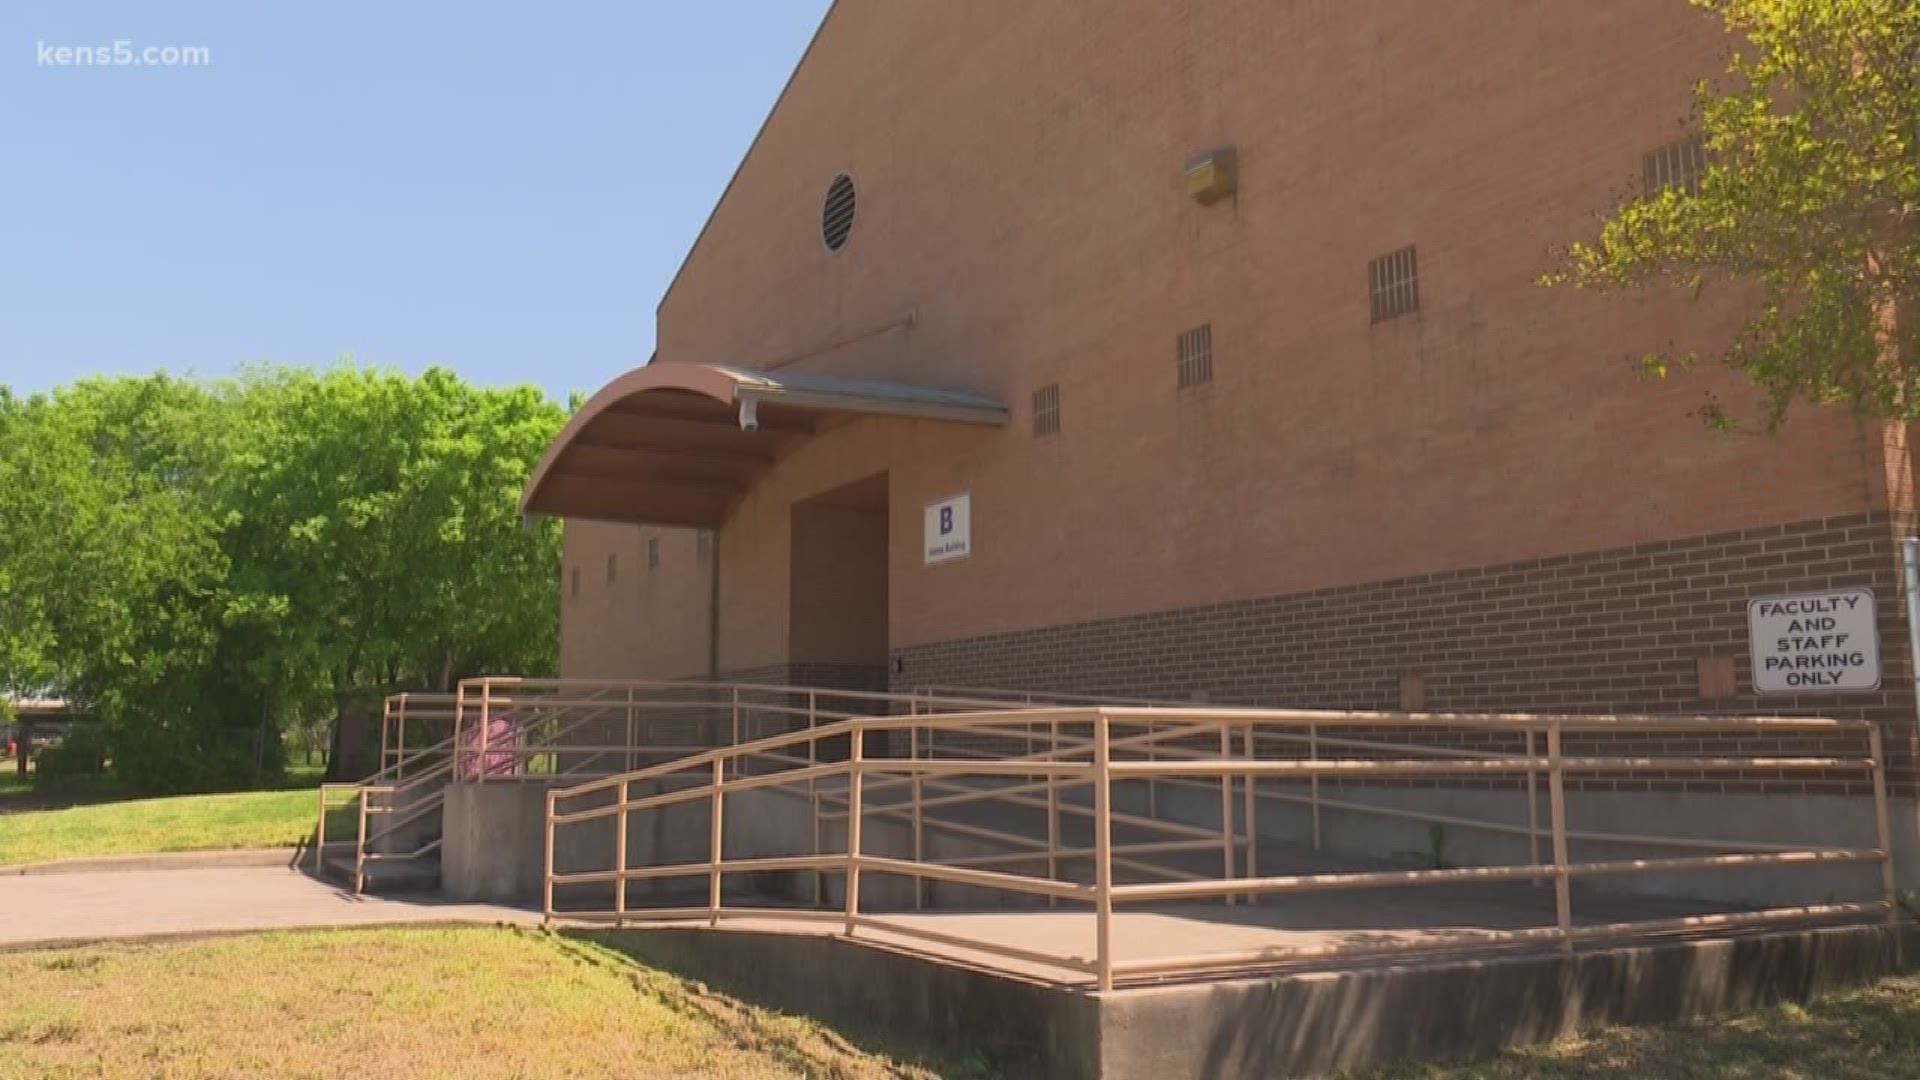 The Bexar County Sheriff's Academy is once again on the move. The South San Antonio ISD school board says it wants its campus back. Eyewitness News reporter Sue Calberg explains what's at stake.